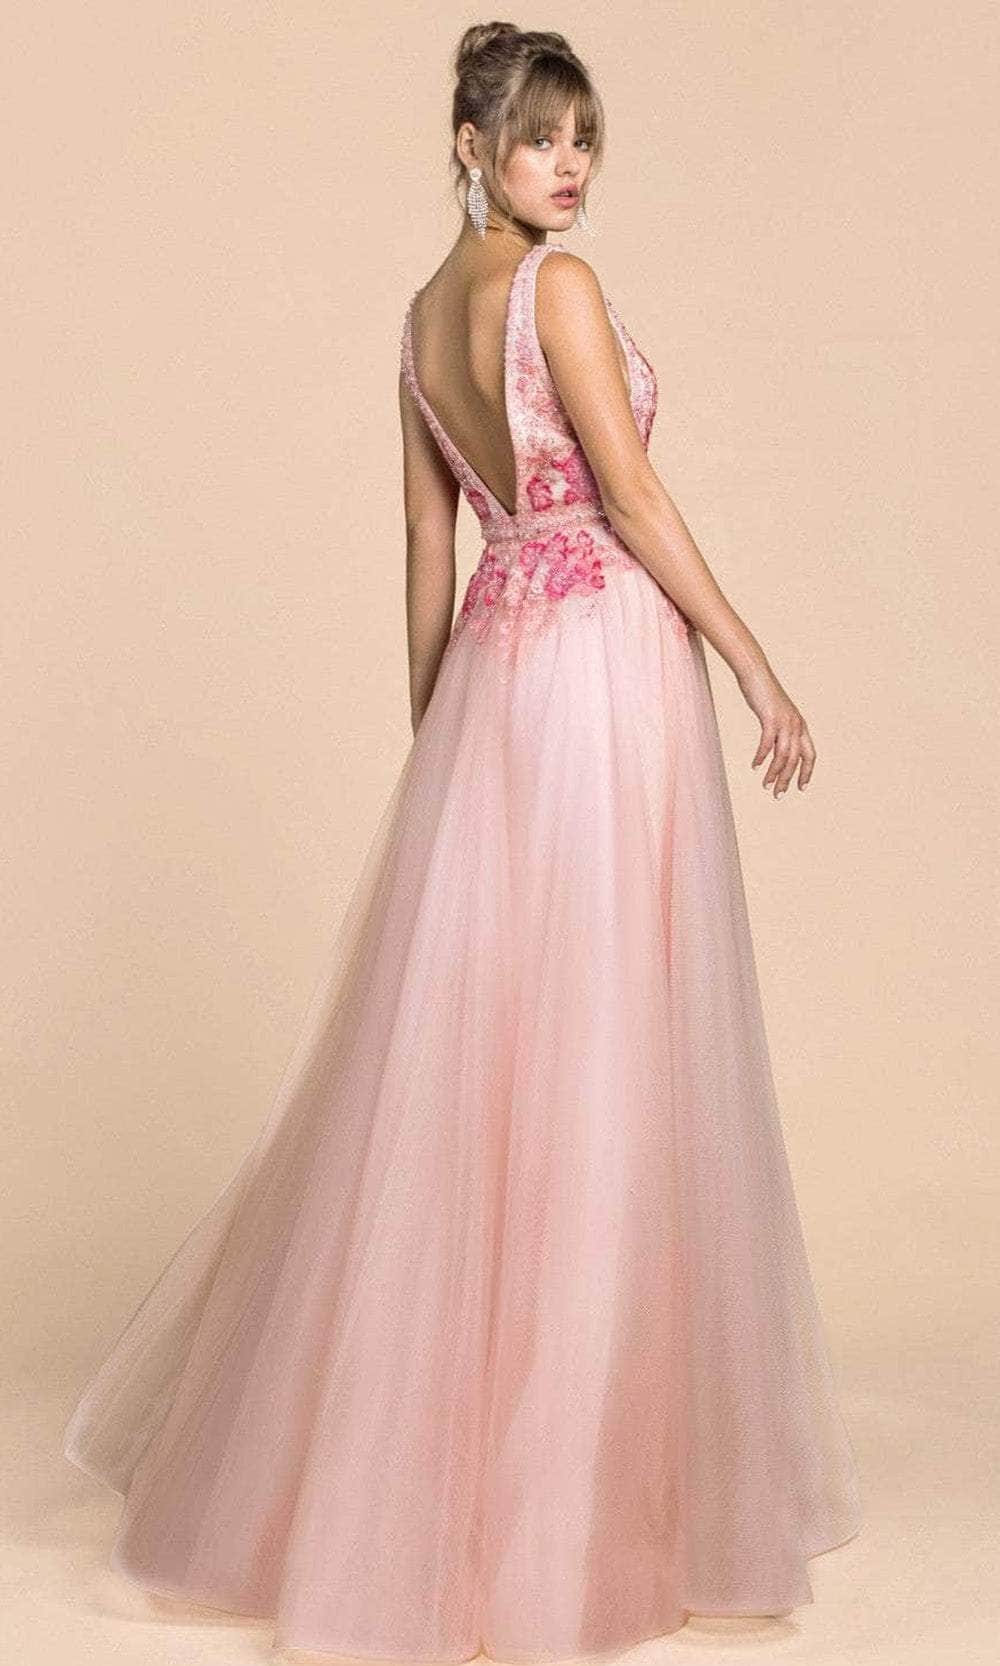 Andrea and Leo A0072 - Peony Embroidered A-Line Prom Dress Special Occasion Dress